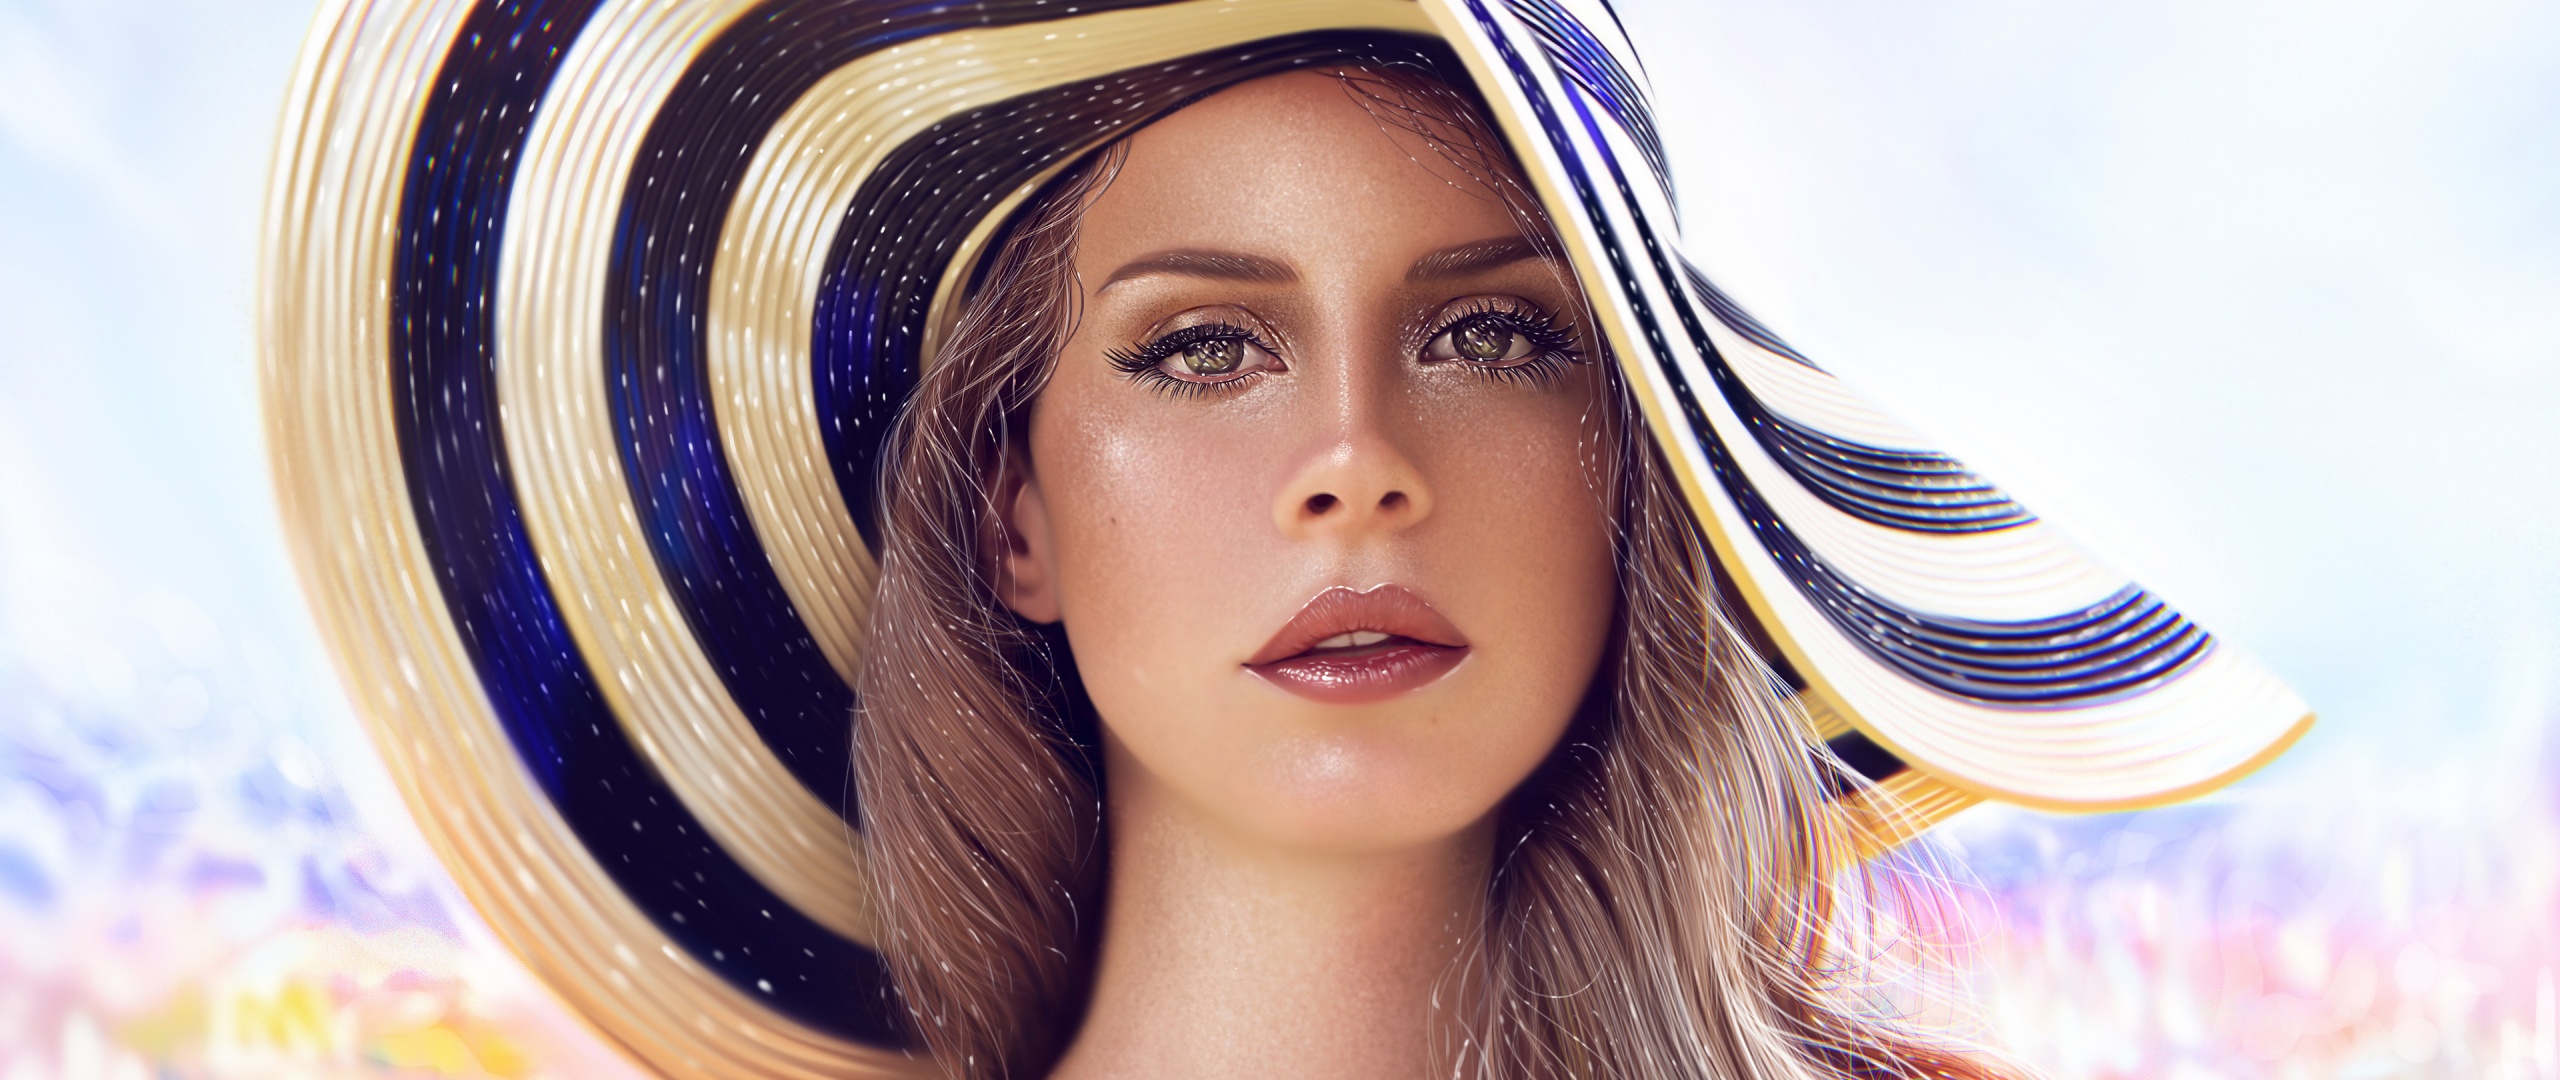 A woman wearing an elaborate hat and makeup - Lana Del Rey